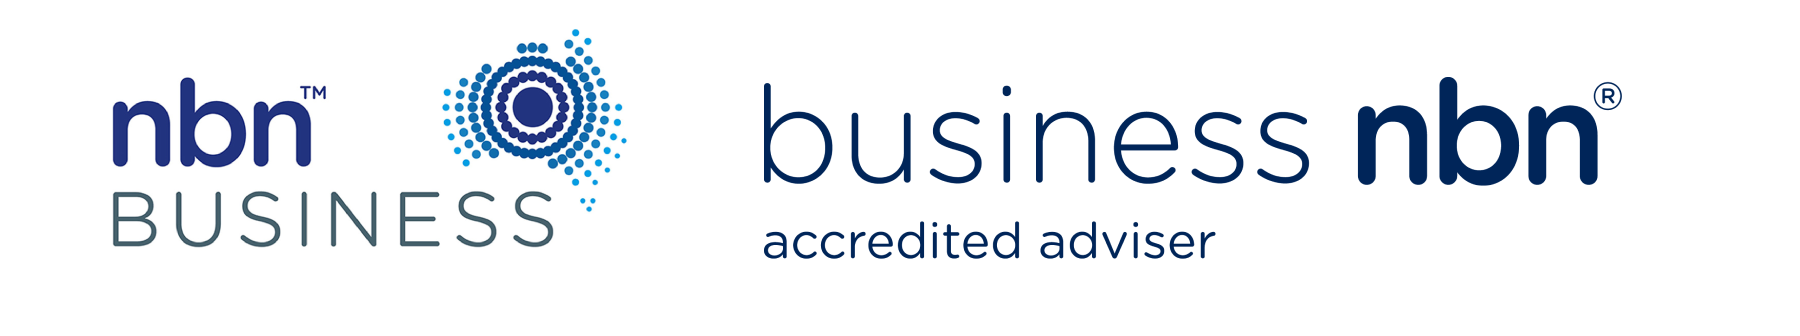 business_accredited_adviser